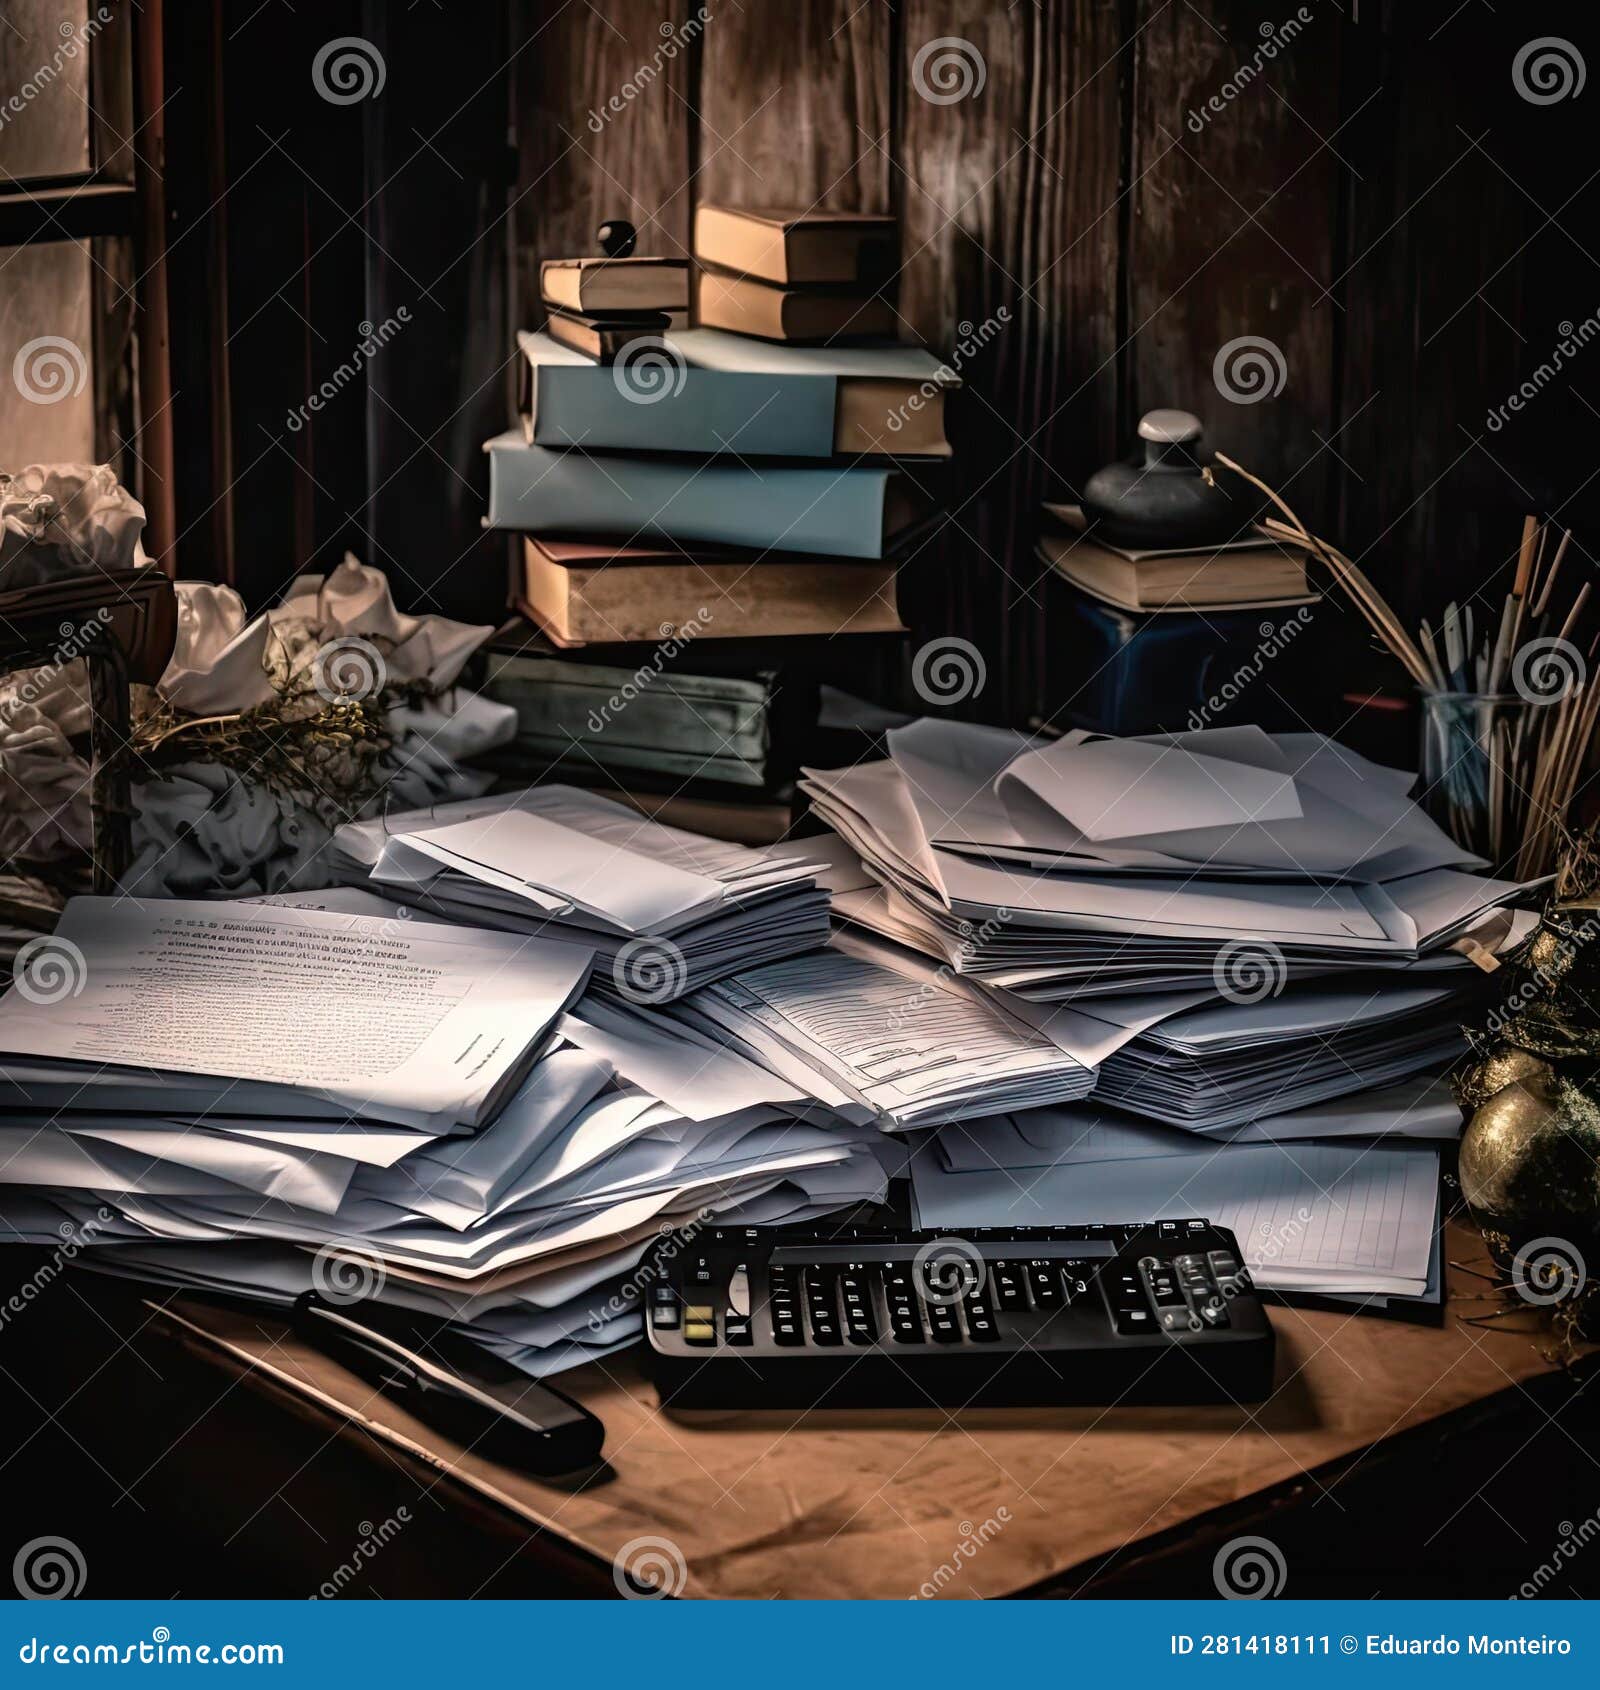 Messy Office Desk with Piles of Books, Calculator, and Paper Stock ...